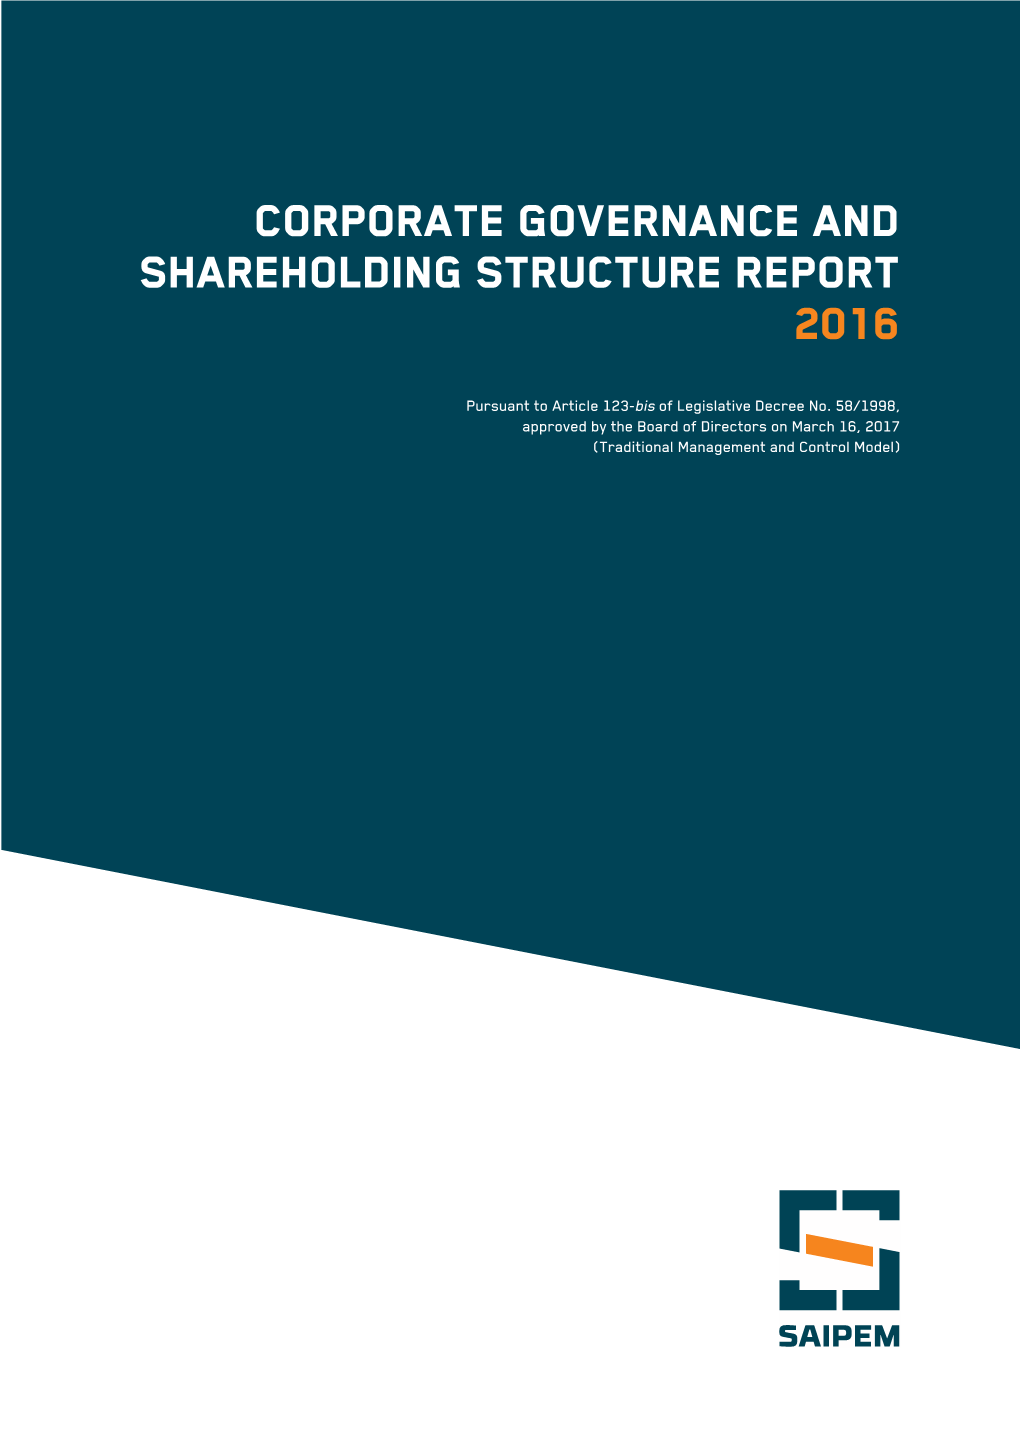 Corporate Governance and Shareholding Structure Report 2016